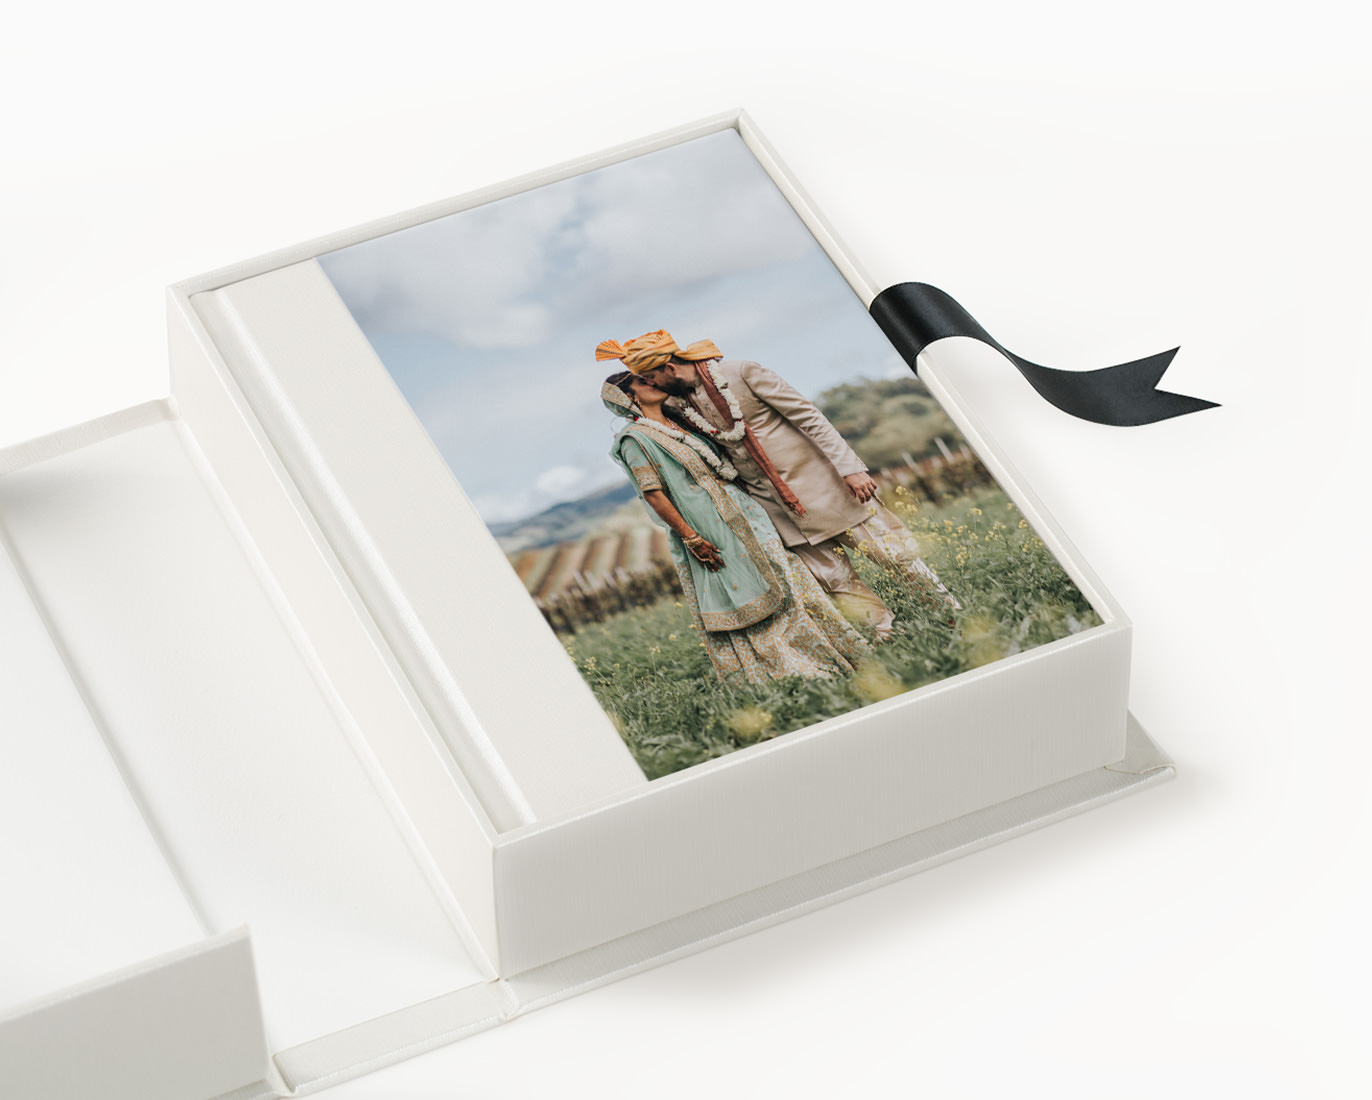 Buy La Lente Premium Photo Album, Large Customizable, 50 pages/100 Sheets,  4x6, 5x7, 8x10, Gold Stamped, Dry-Mount, Picture Scrapbook, Wedding,  Vacation, Anniversary, Baby Shower, Graduation or Travel Online at Low  Prices in